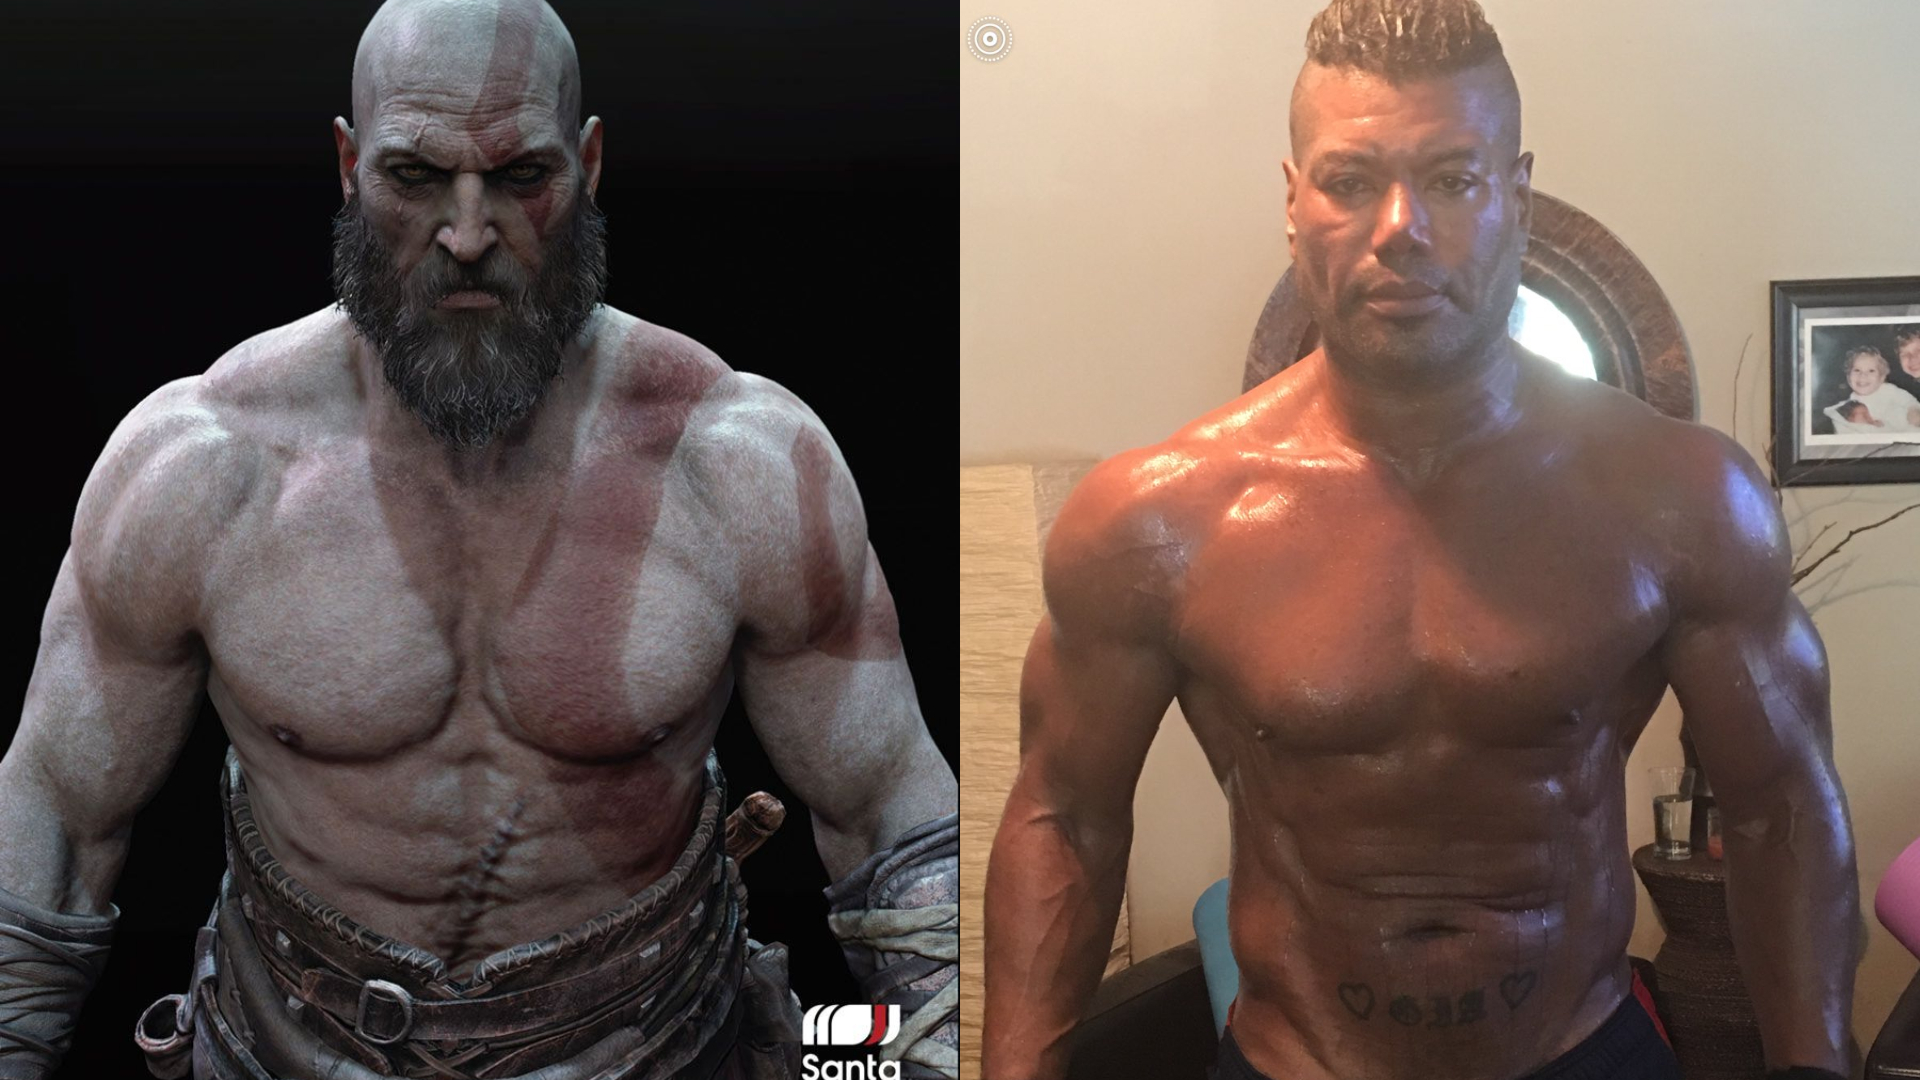 Kratos voice actor wants to play the character in TV series GamersRD